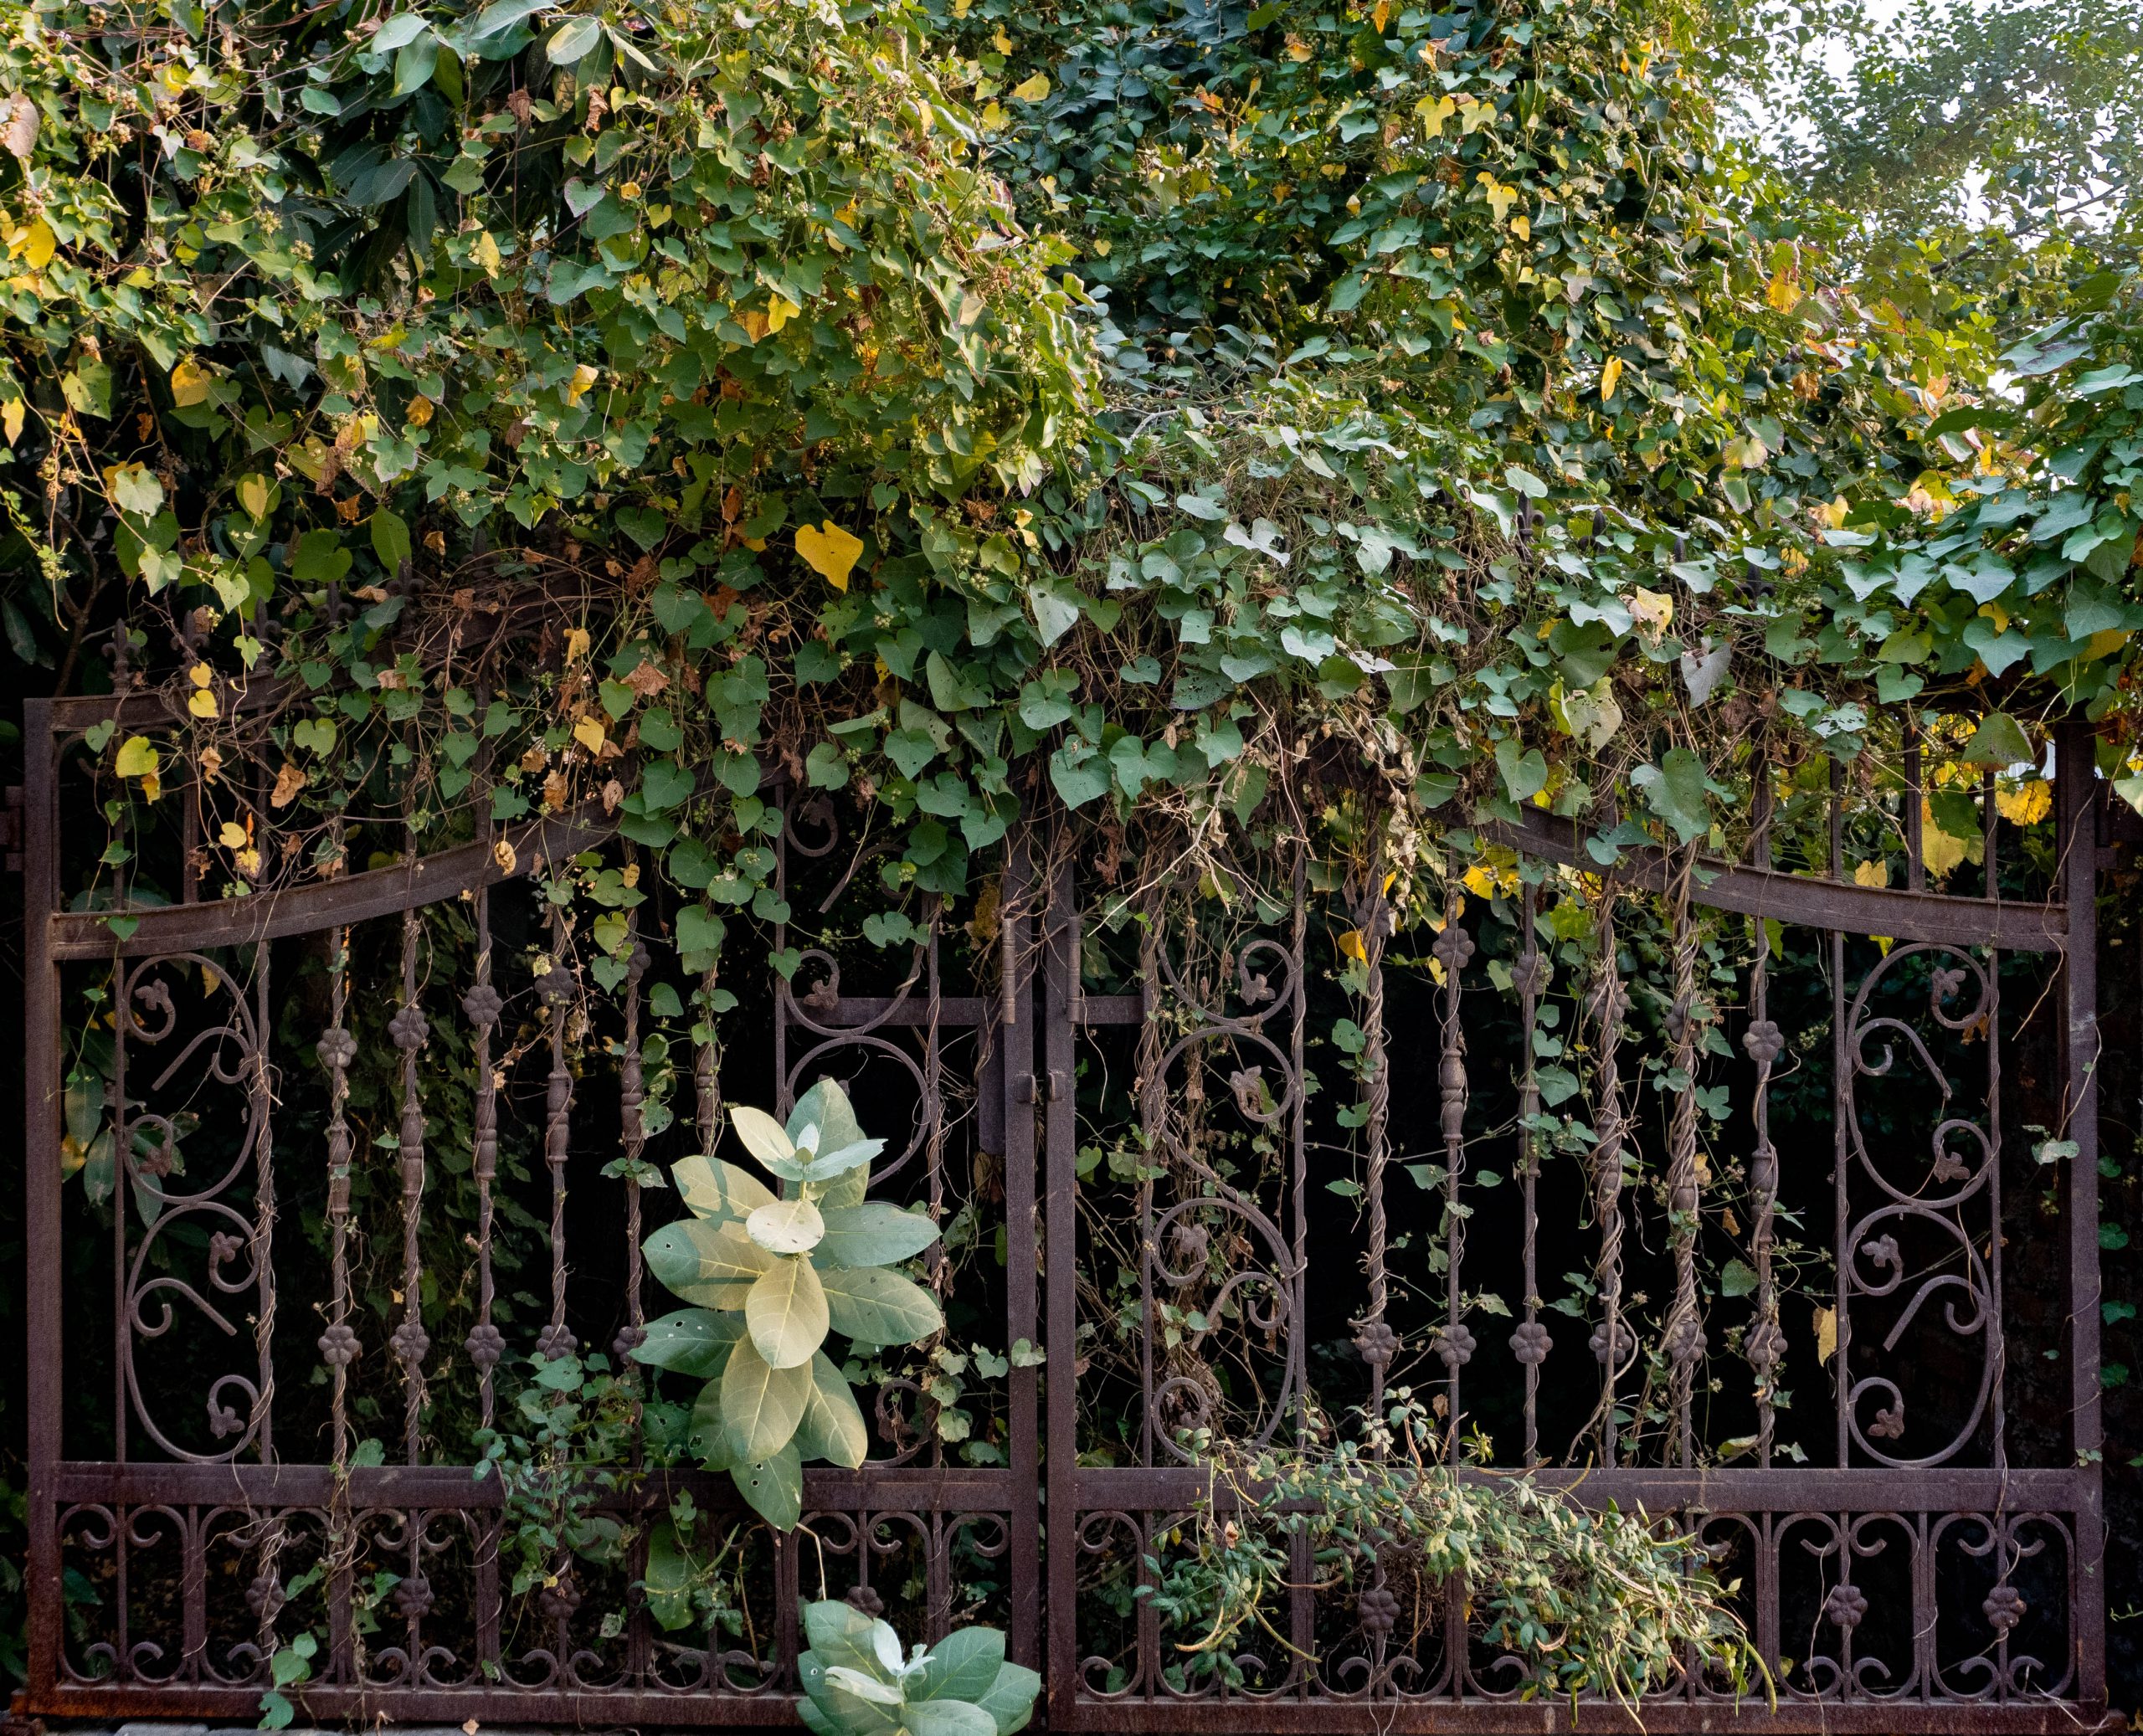 rusted iron entrance gate , plants, cllimbers and vignettes in old abandoned deserted houses